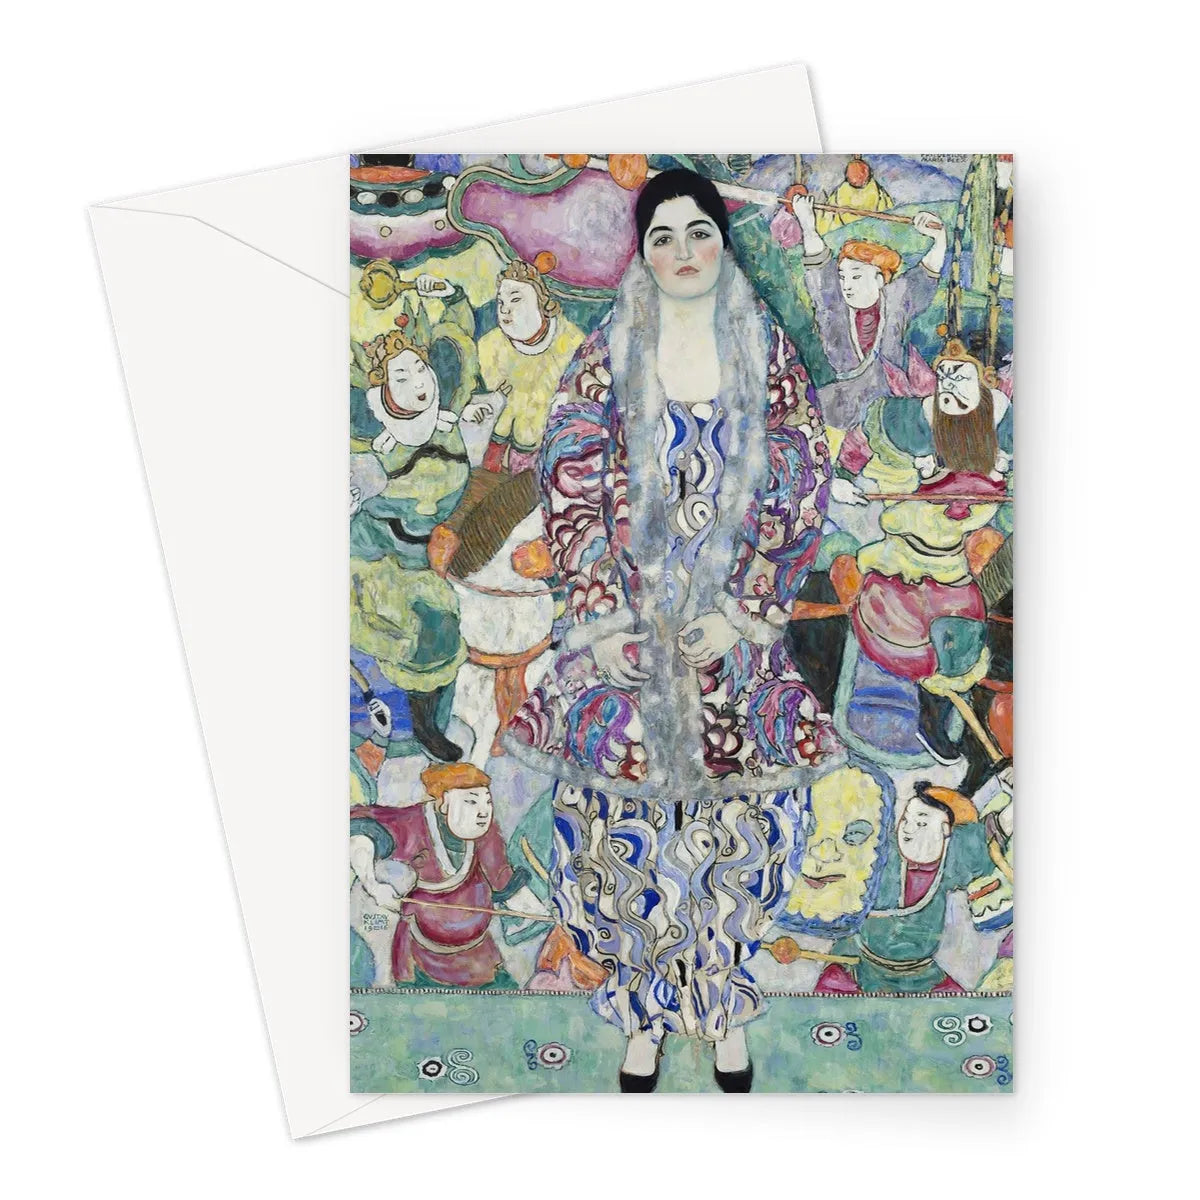 Friederike Maria Beer By Gustav Klimt Greeting Card - A5 Portrait / 10 Cards - Greeting & Note Cards - Aesthetic Art